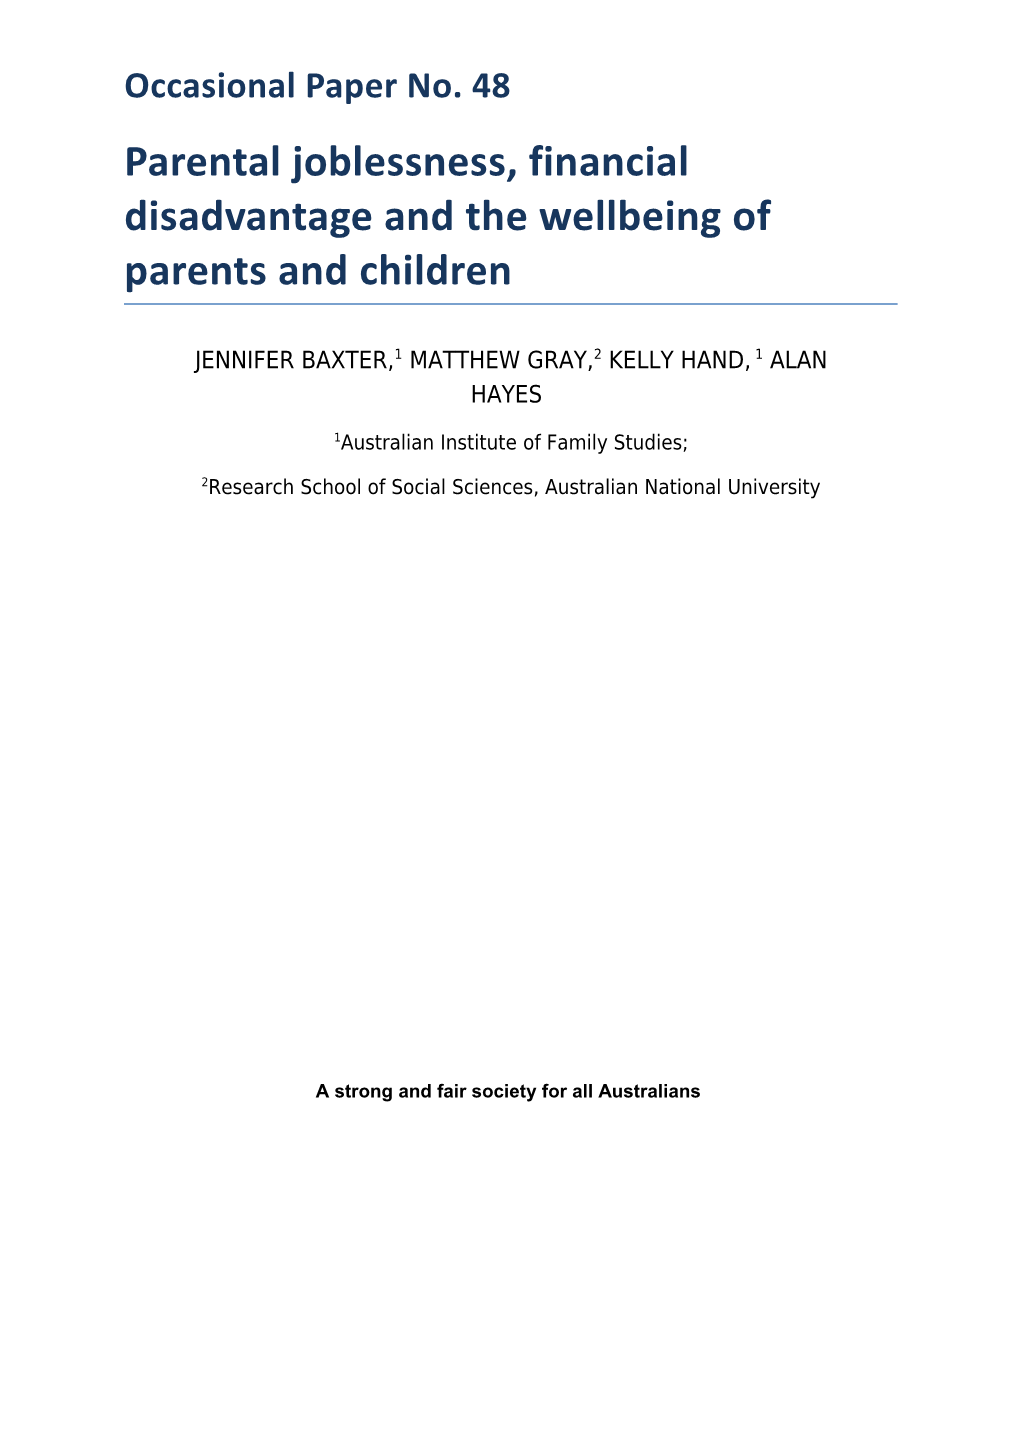 Parental Joblessness, Financial Disadvantage and the Wellbeing of Parents and Children